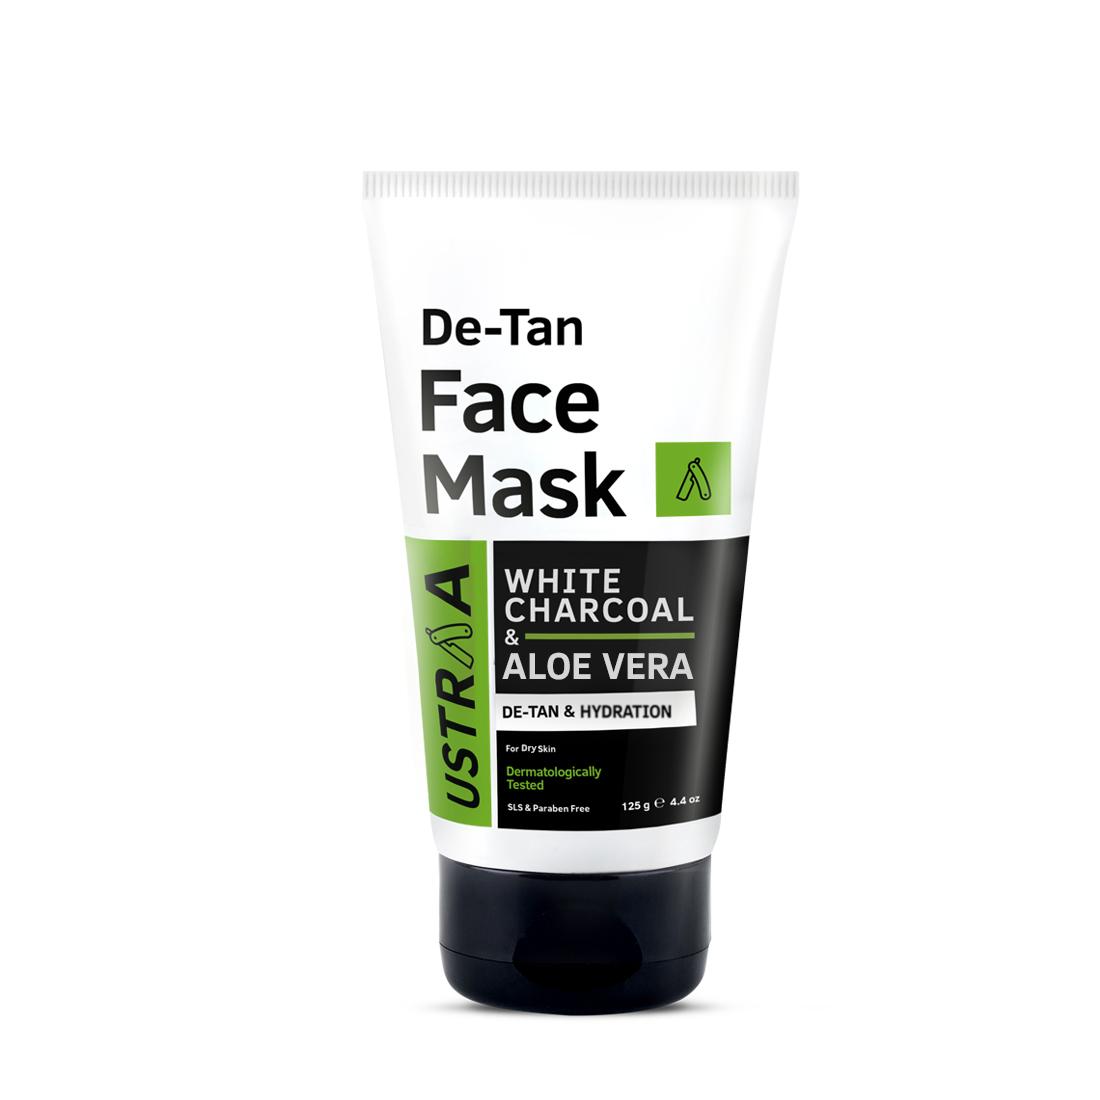 Ustraa De Tan Face Mask for Men with Dry Skin  125 g - For Tan Removal and Even Skin Tone with Kaolin Clay, White Charcoal, Aloe Vera and Olive Oil